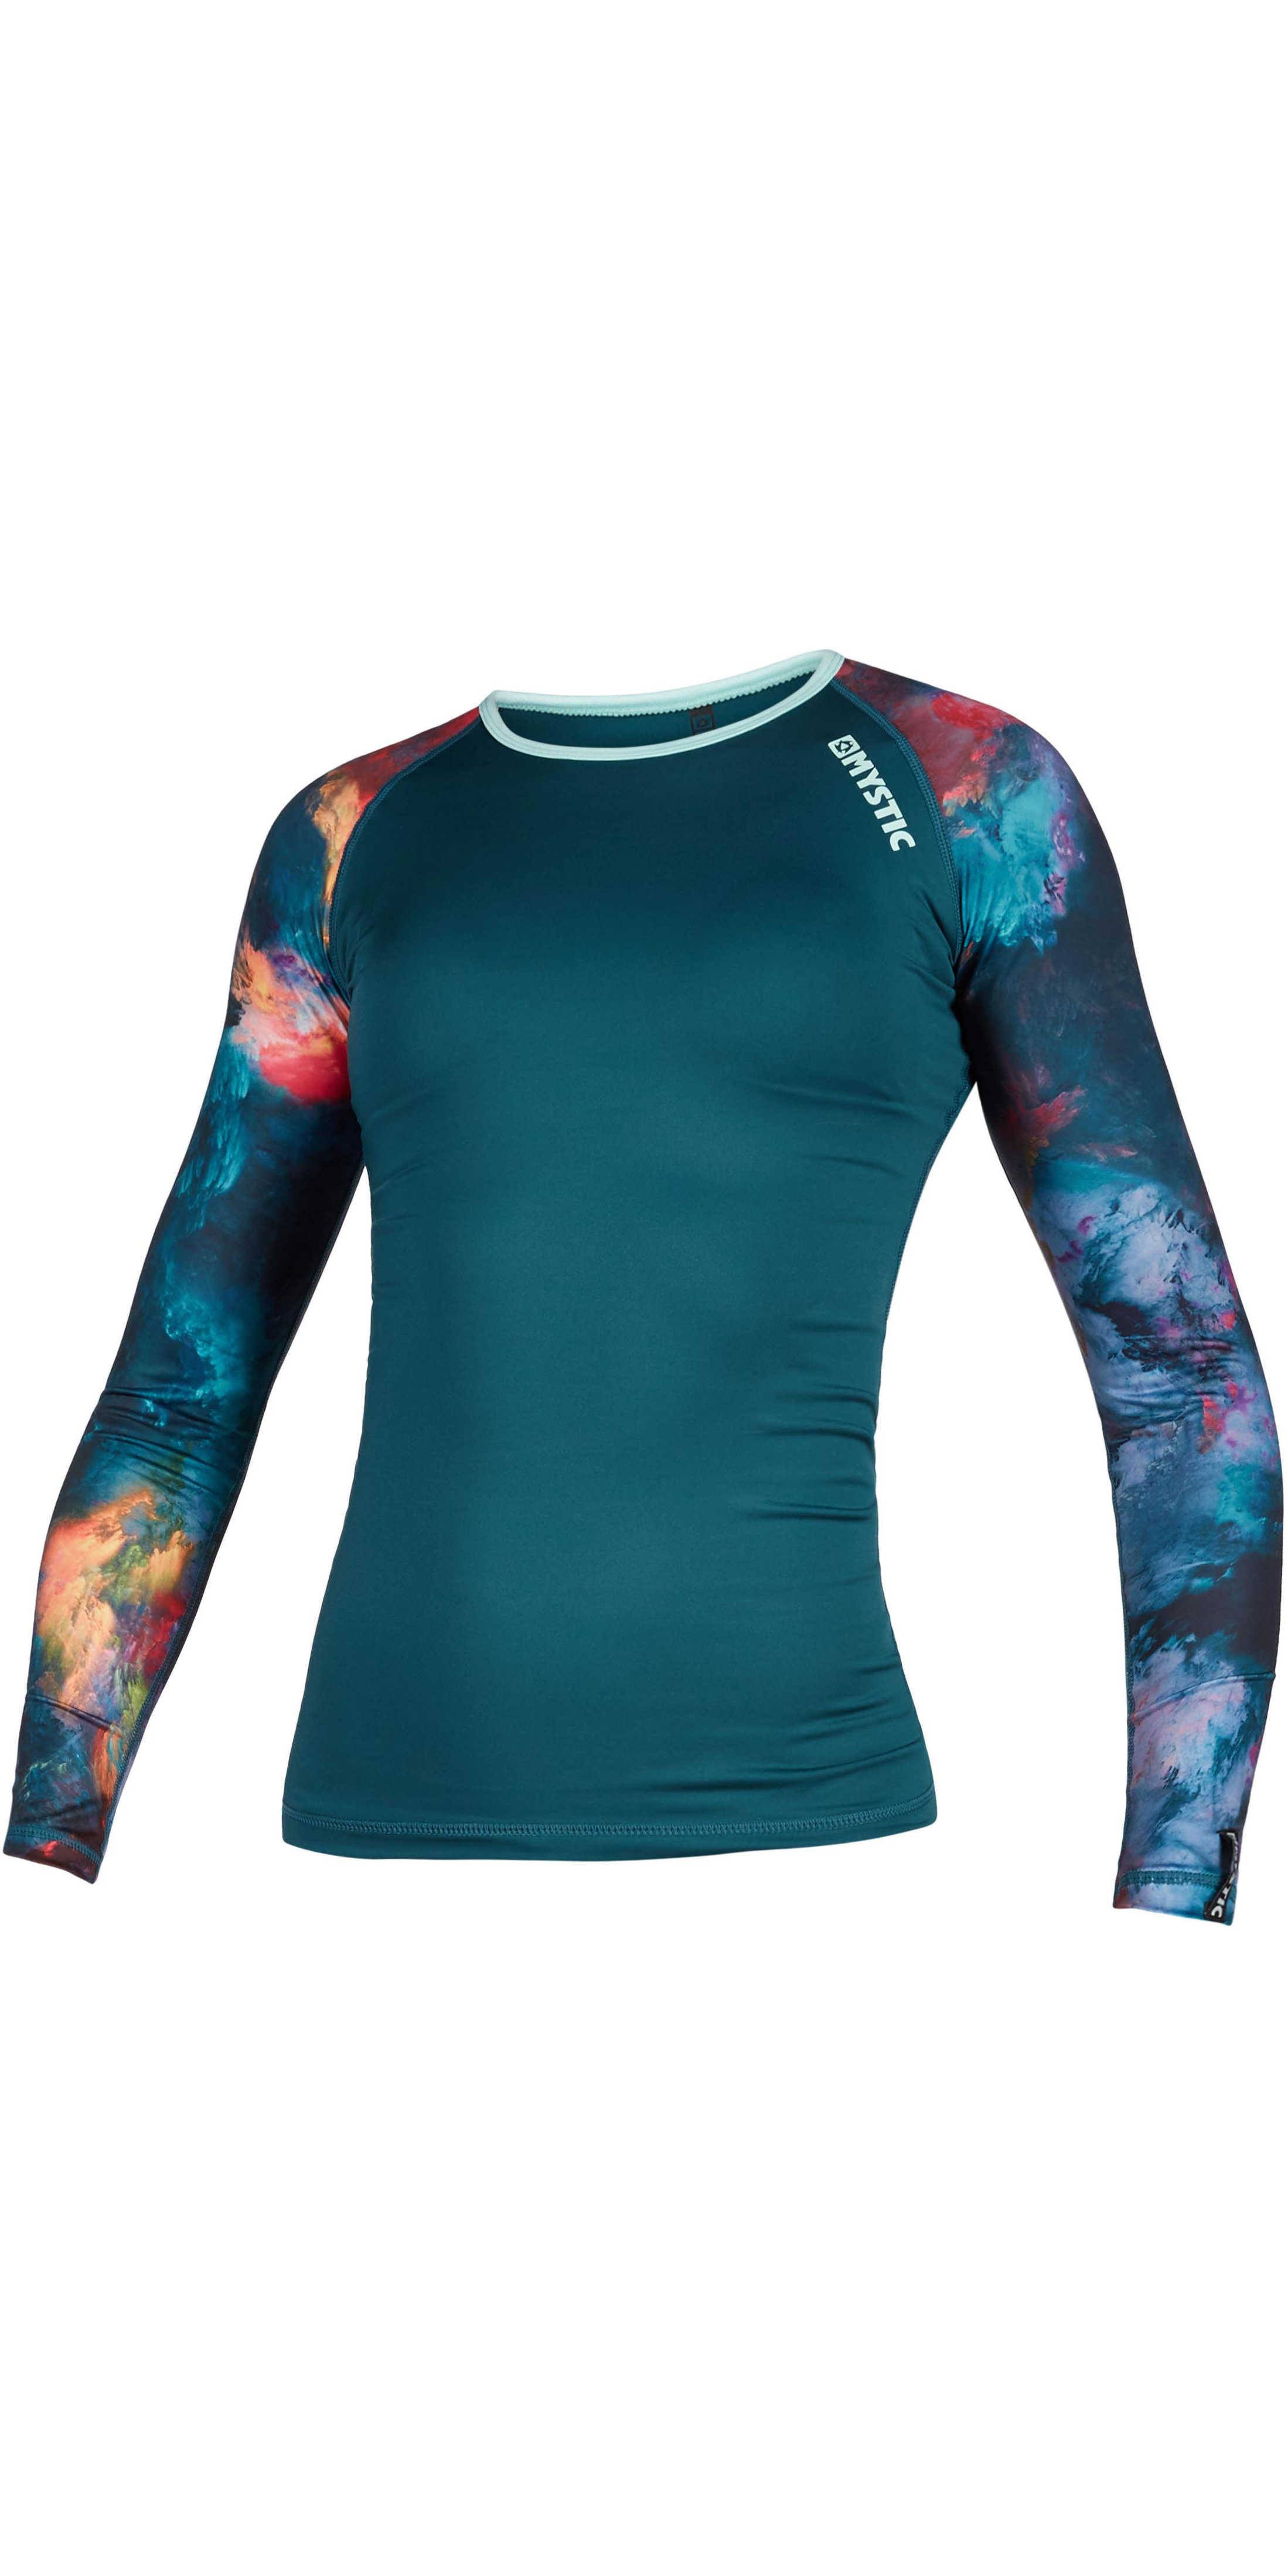 Teal 200153 Details about   Mystic Womens Diva Longsleeve Quickdry Top 2021 